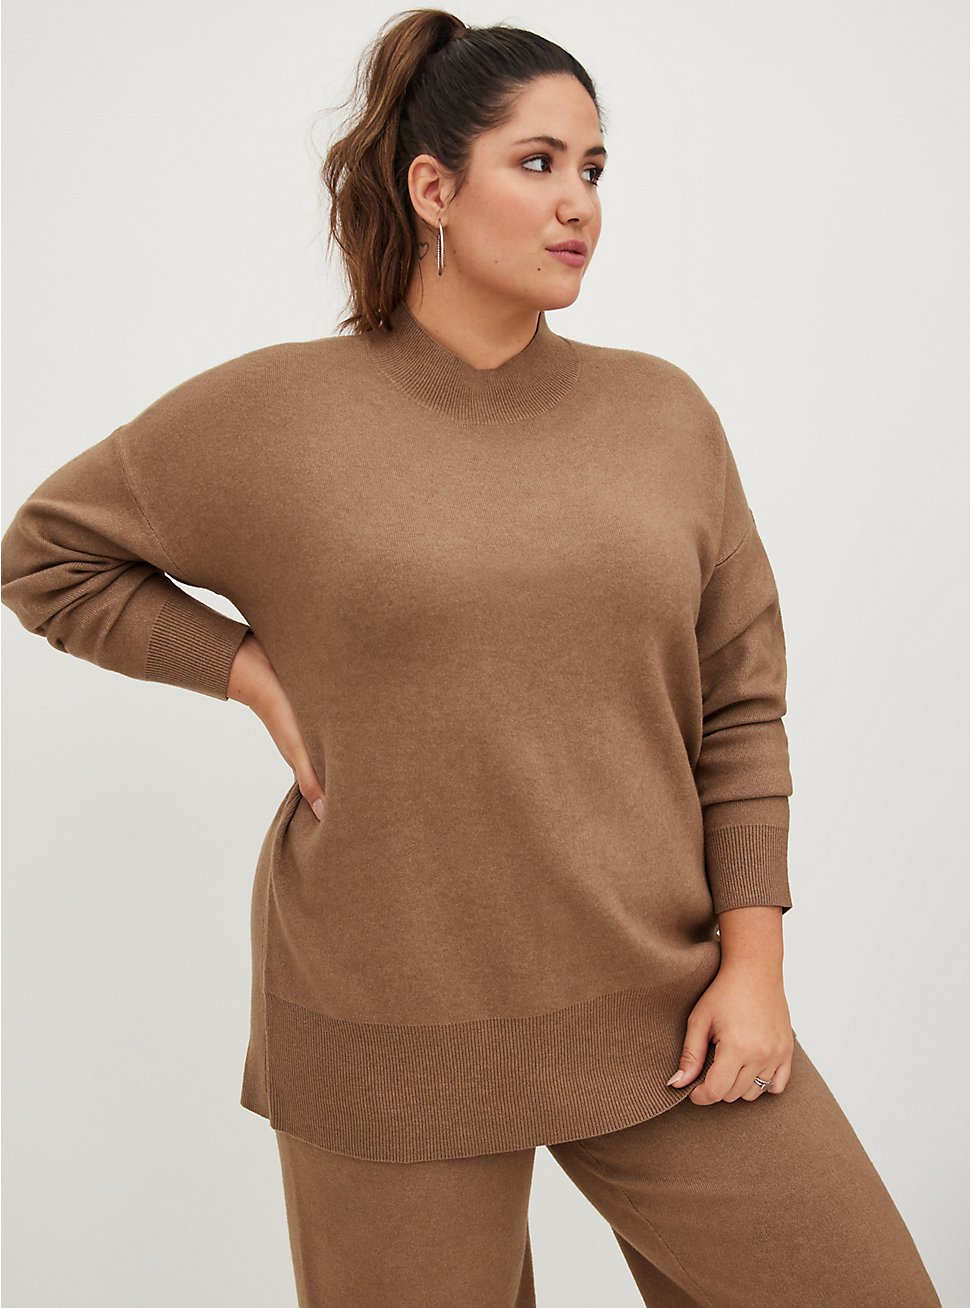 Everyday Plush Pullover Mock Neck Tunic Sweater, BEIGE, hi-res